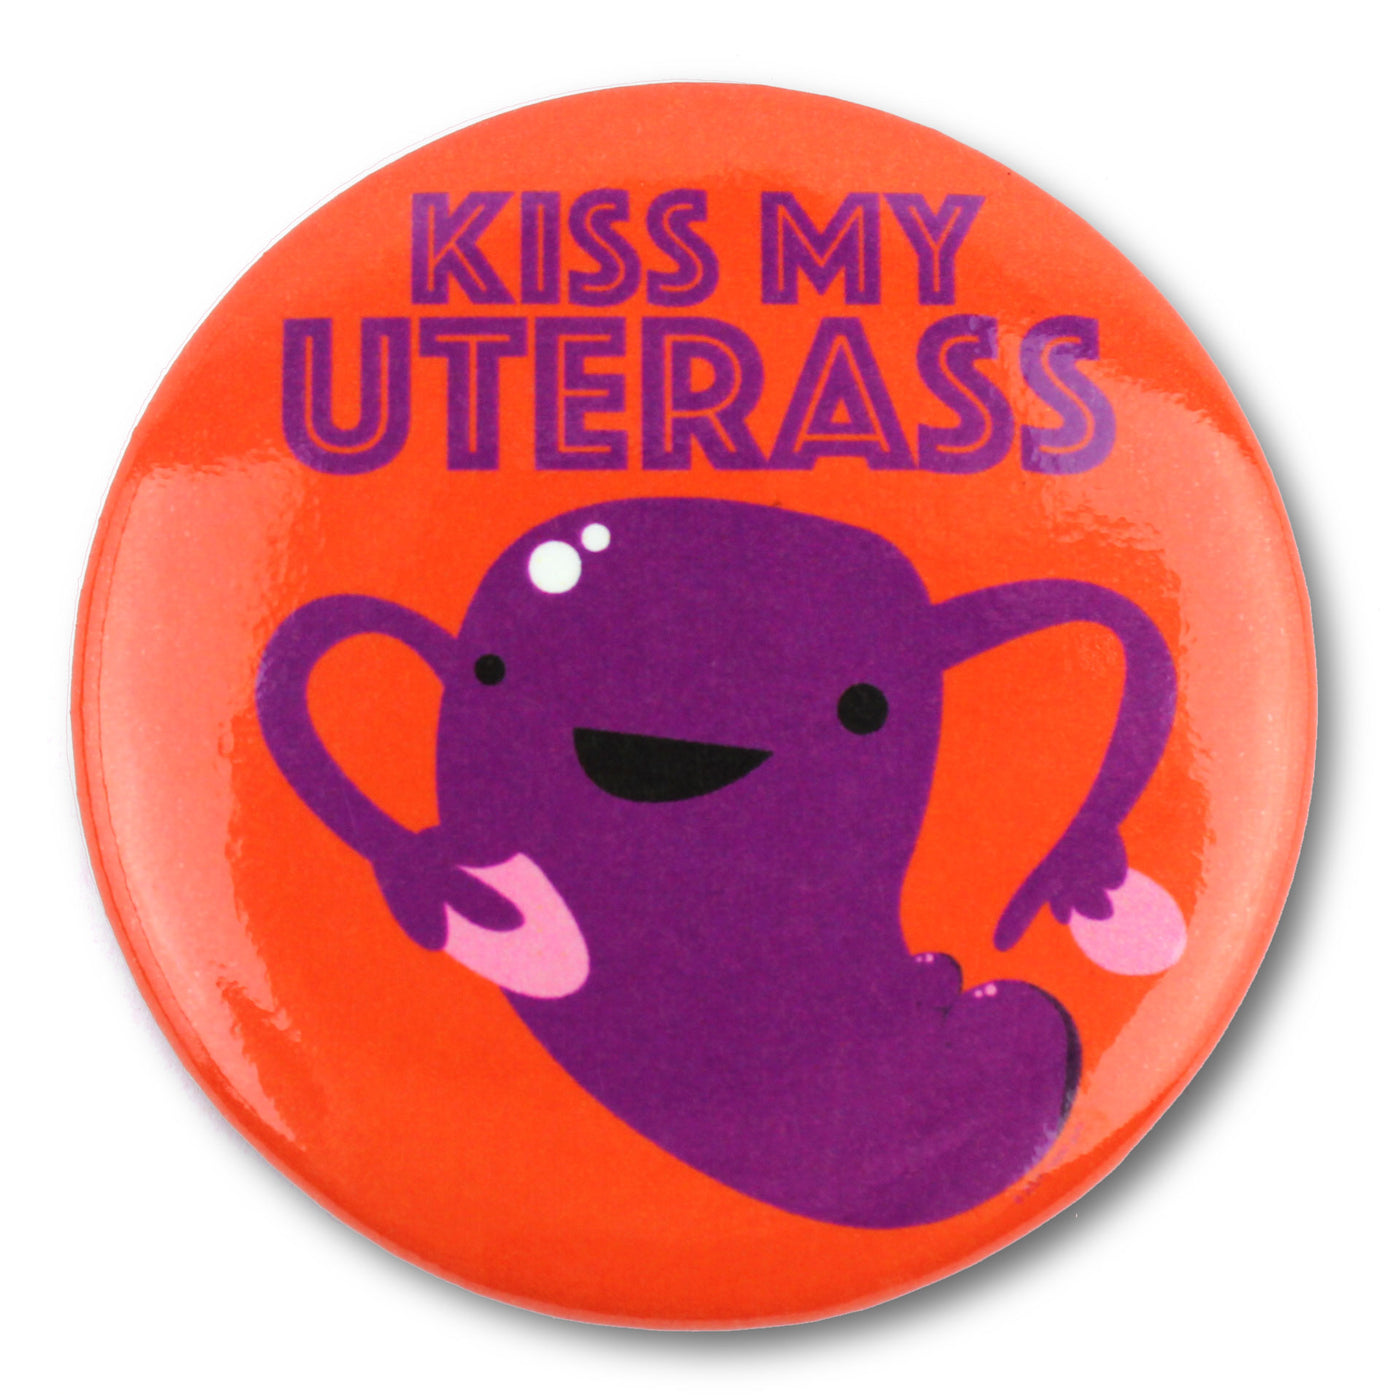 Kiss My Uterus Magnet - Reproductive Rights Humor, OB/GYN Midwife Doula Labor and Delivery Nurse Funny Gift